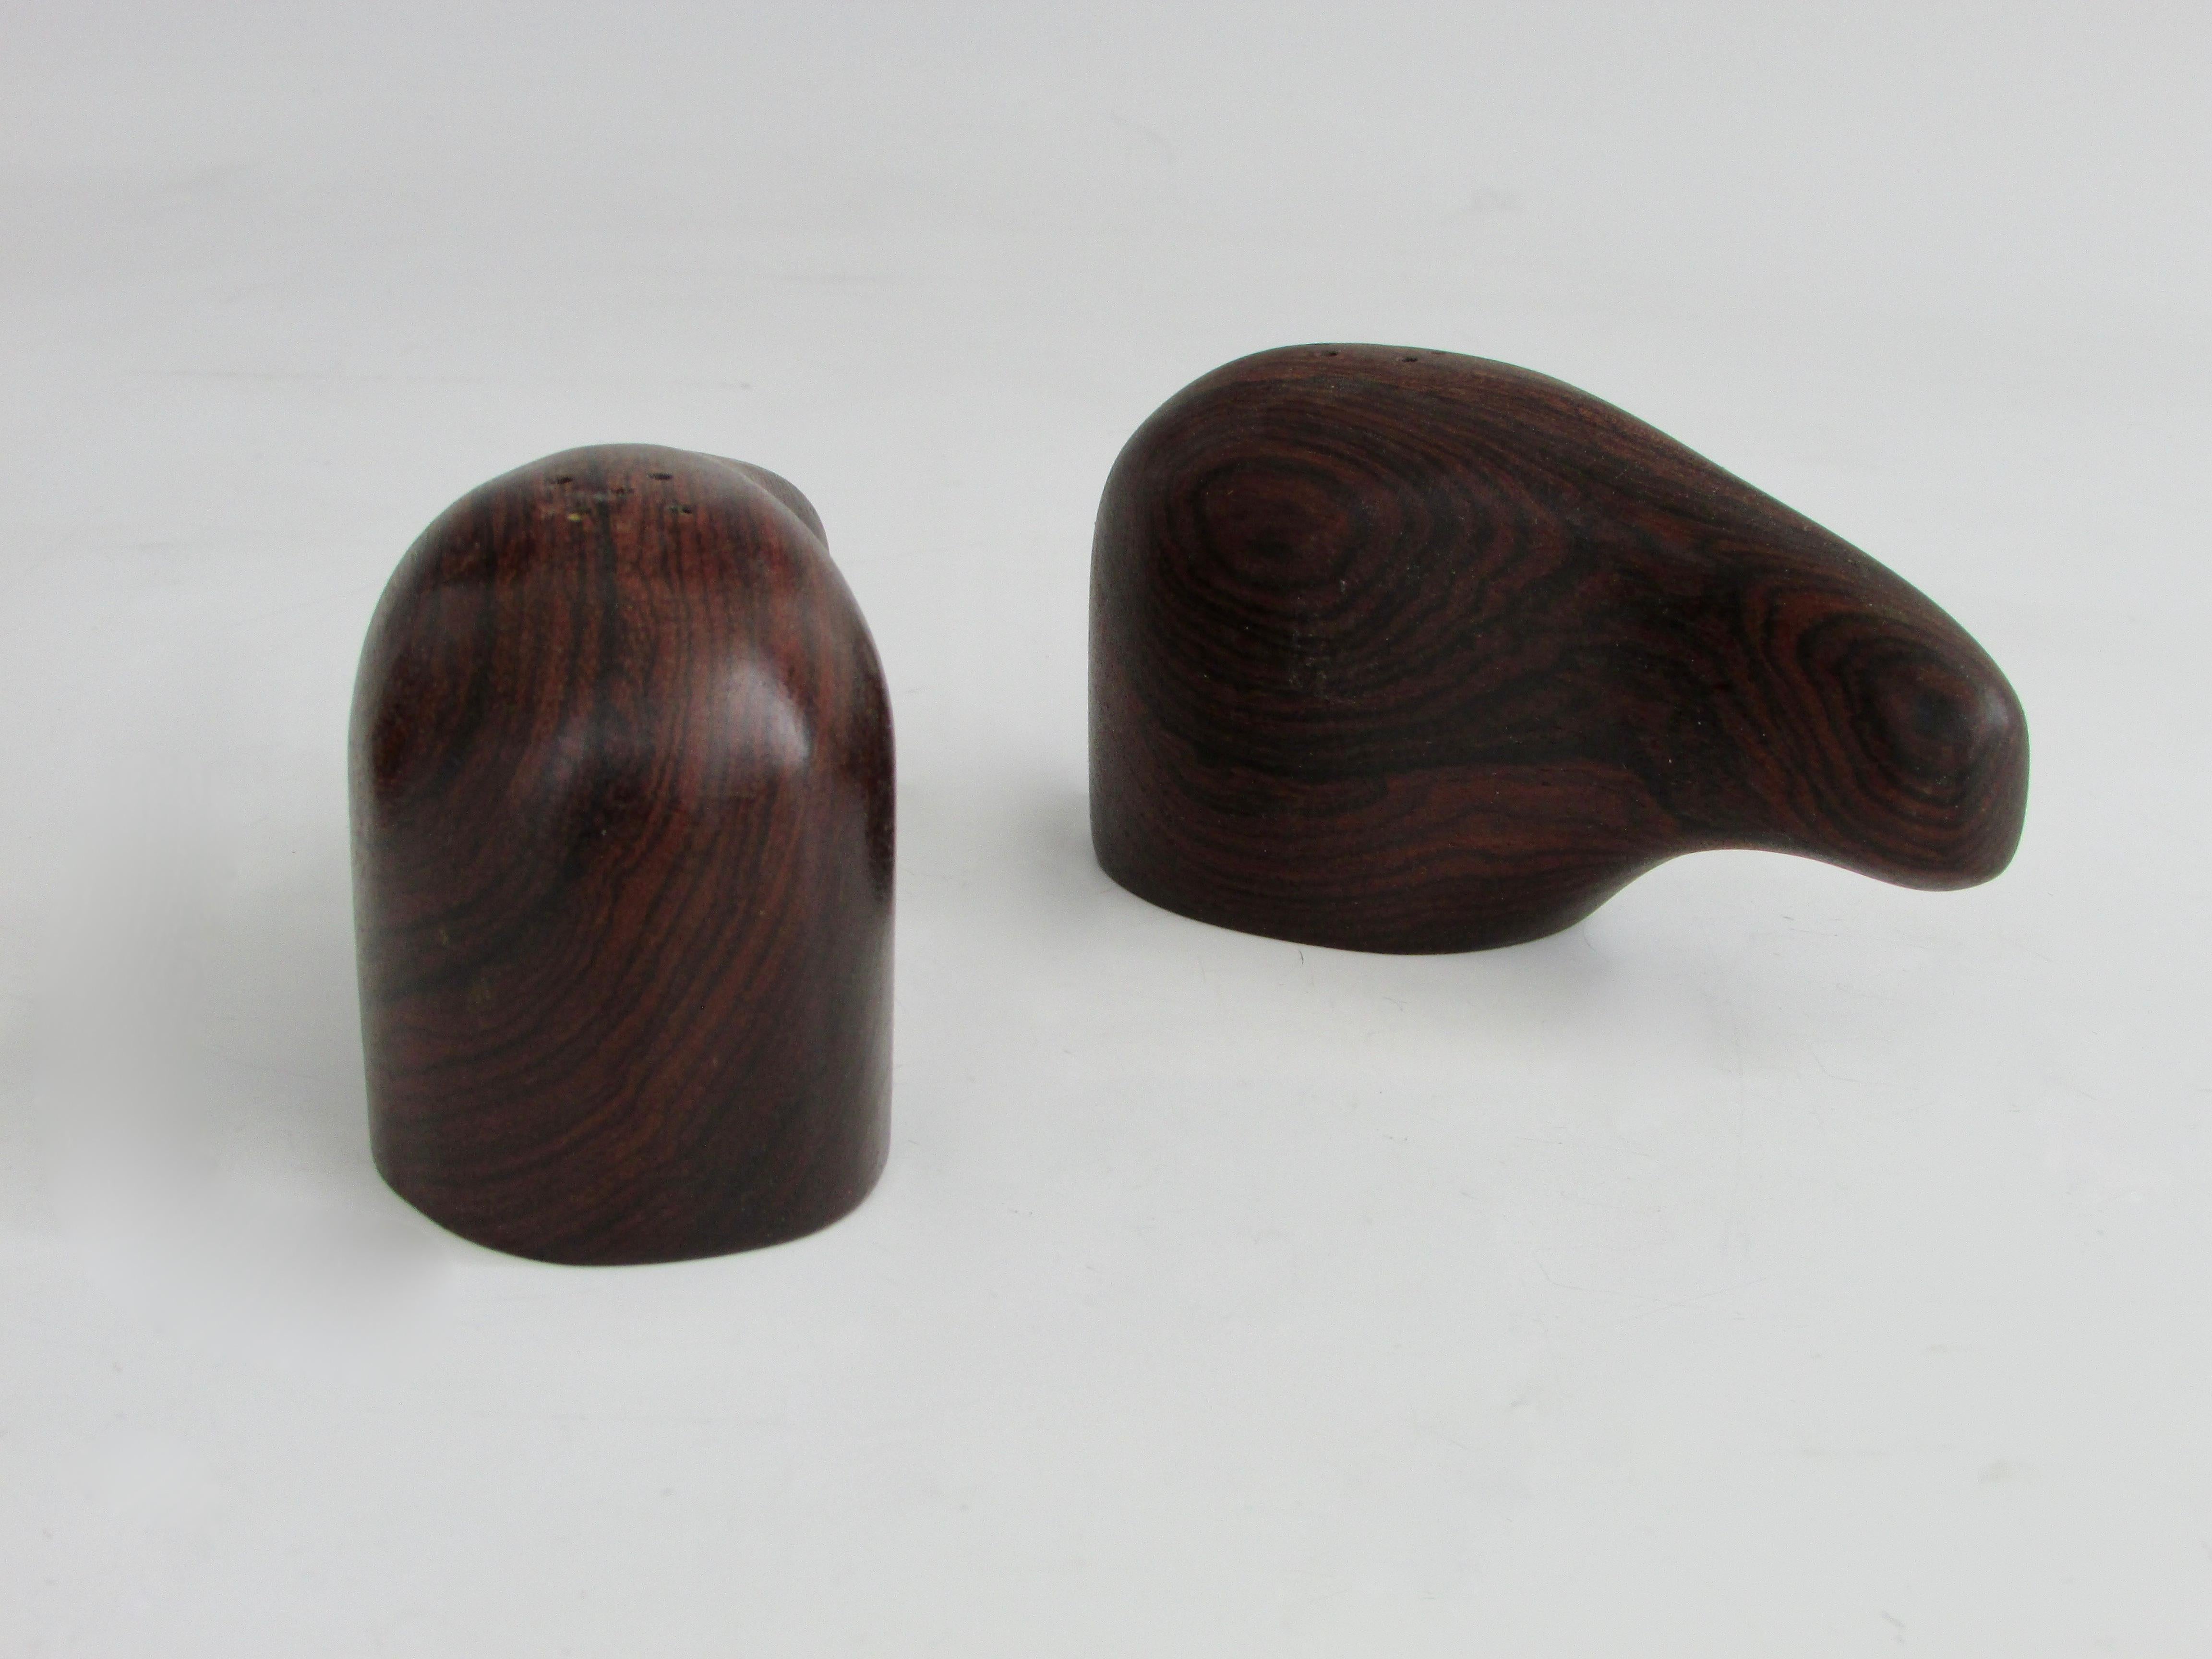 Two pairs available priced separately. Either set is rosewood. I believe them to be Danish origin.